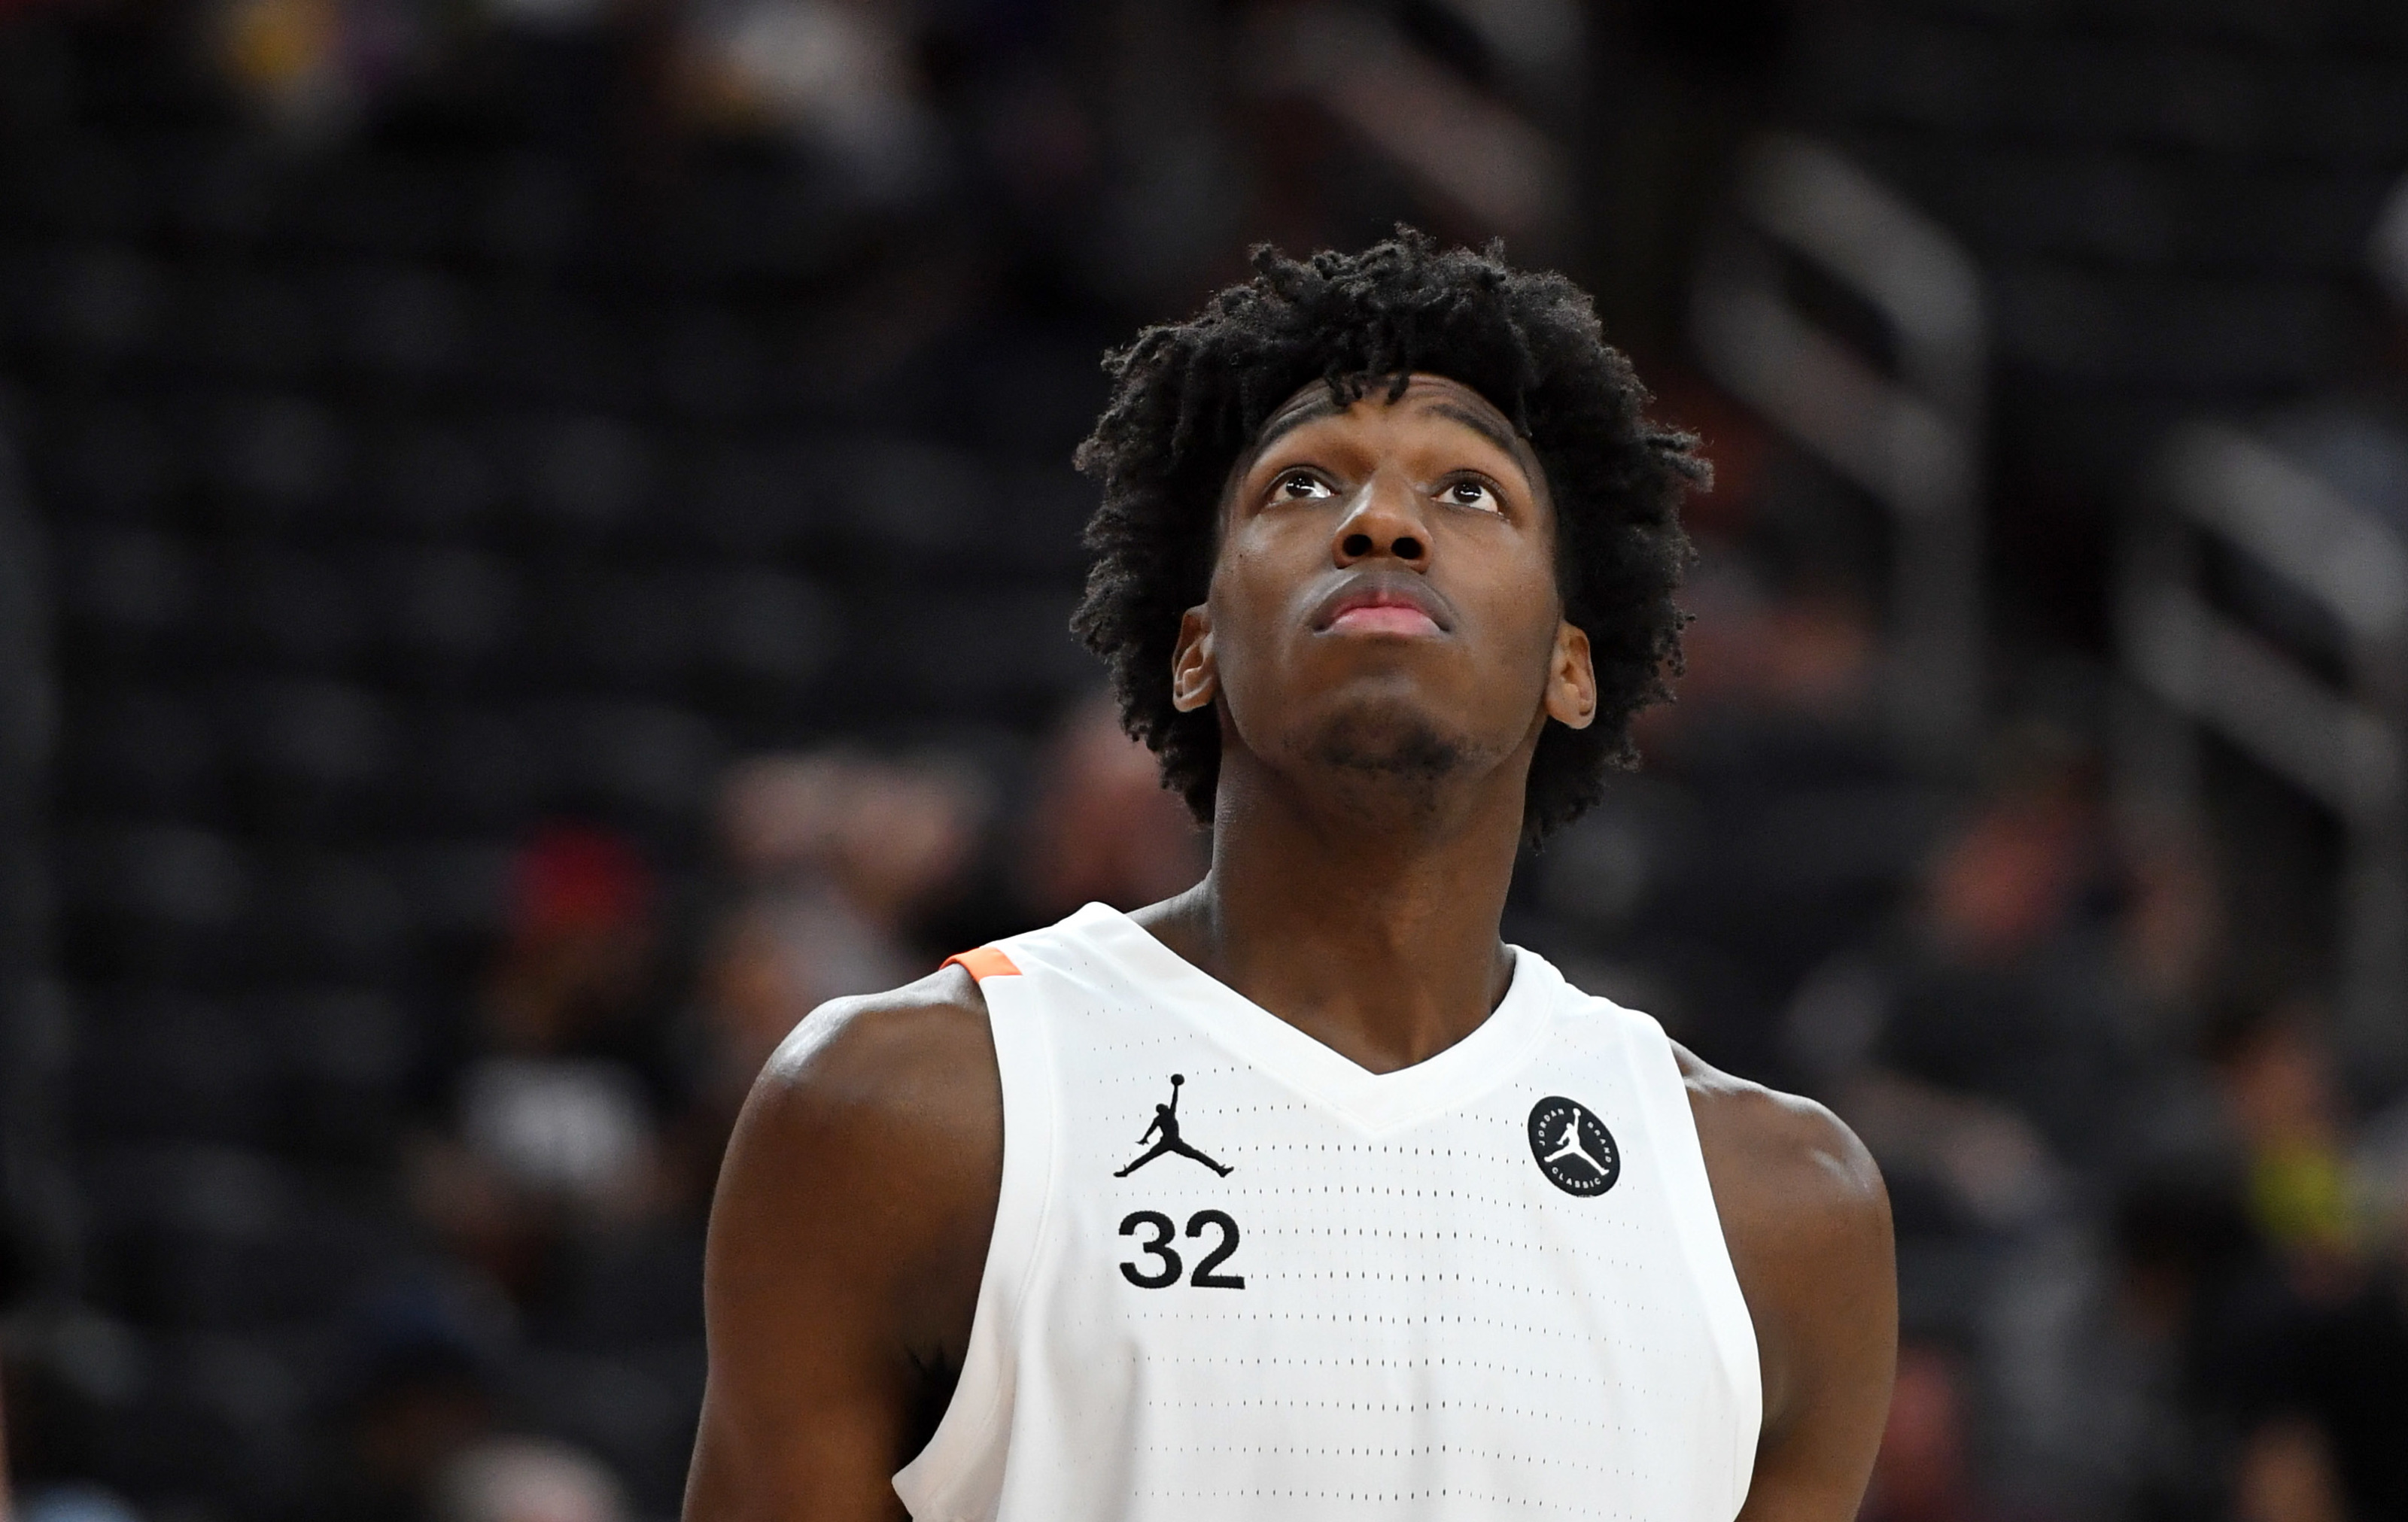 NBA Draft: How would James Wiseman fit in today's NBA?